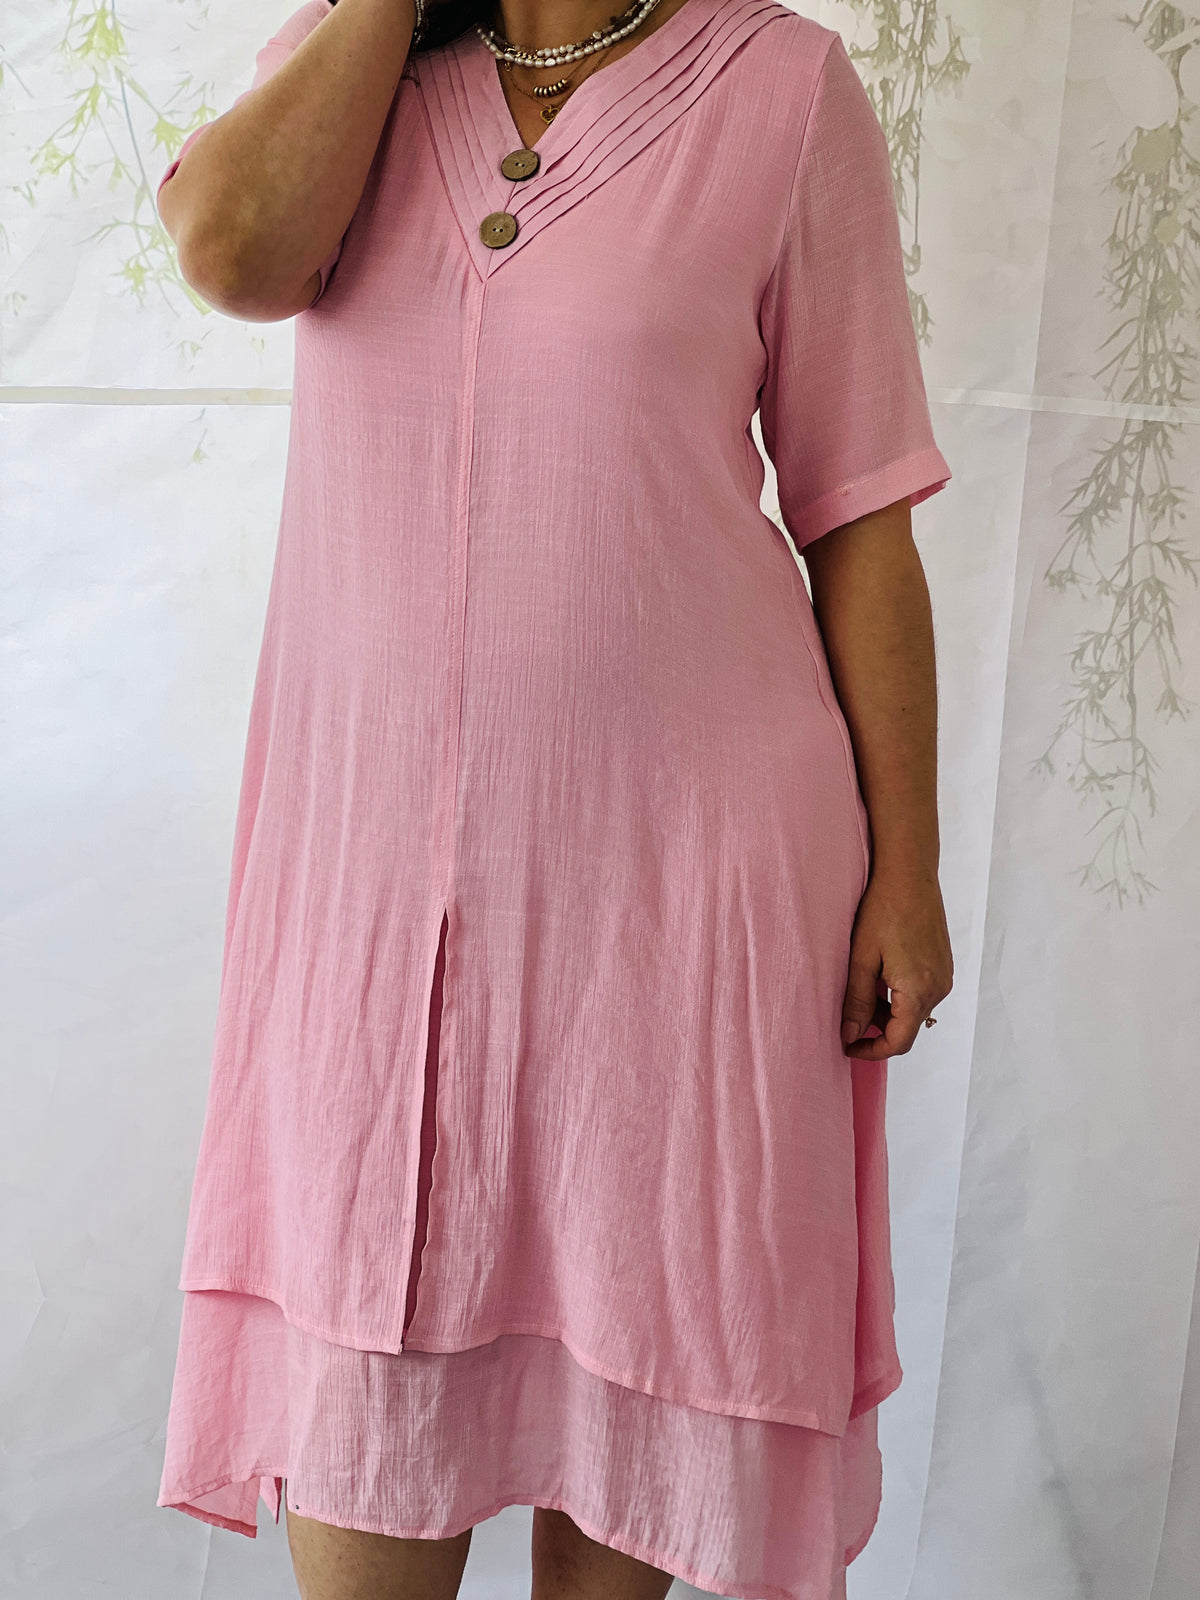 Oxley Pink Layering Dress